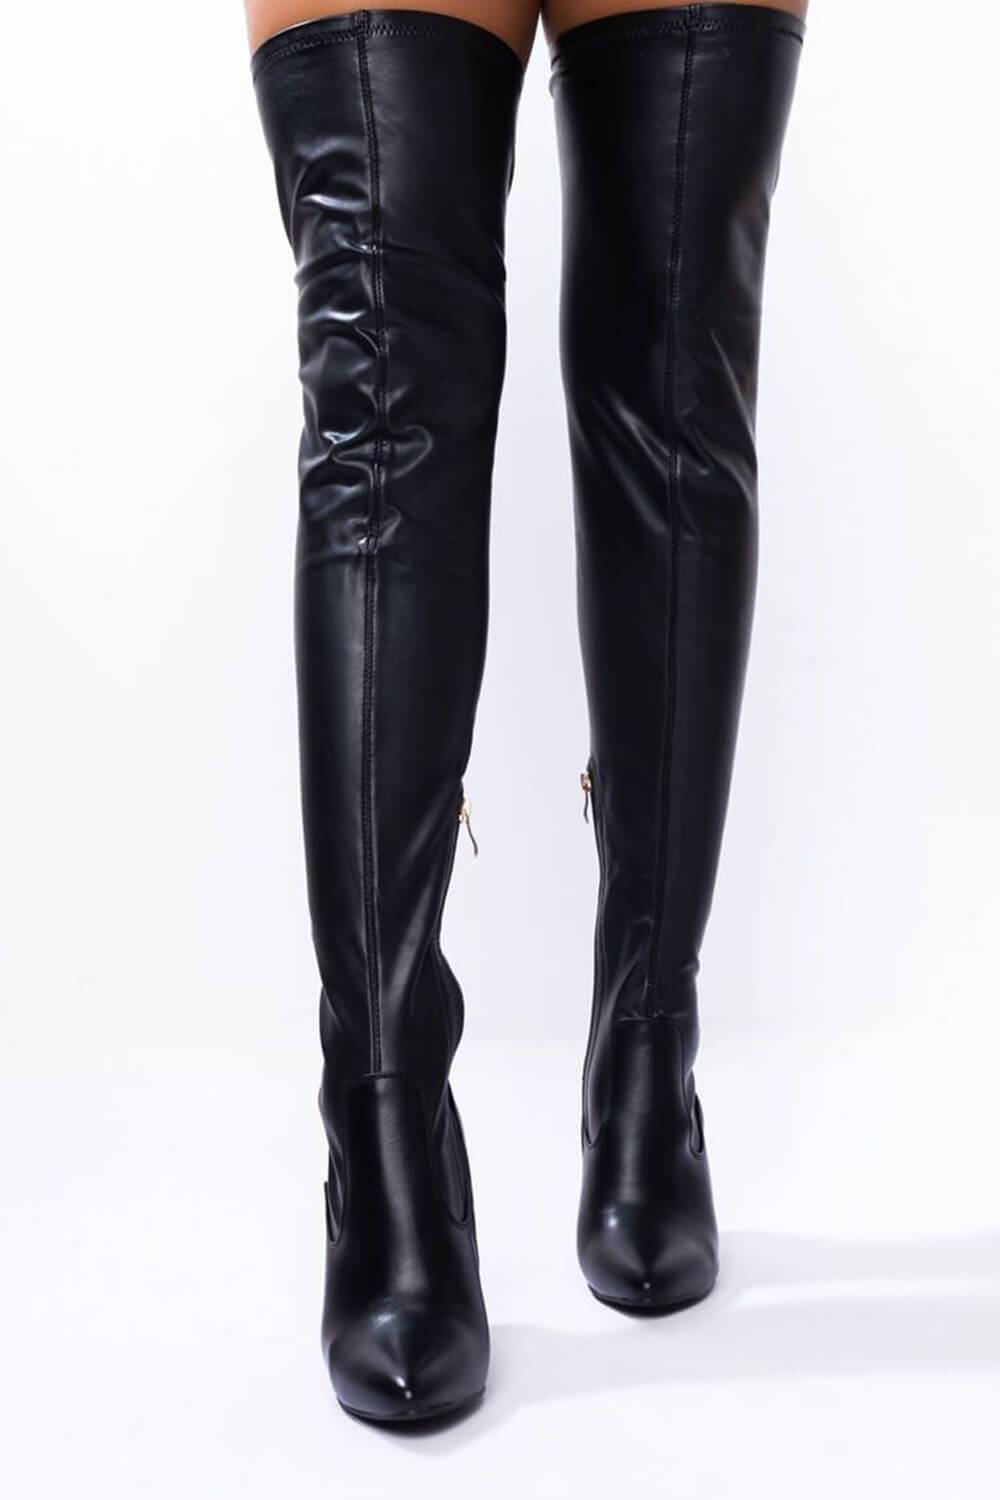 Black Faux Leather Block Heel Over The Knee Thigh High Boots